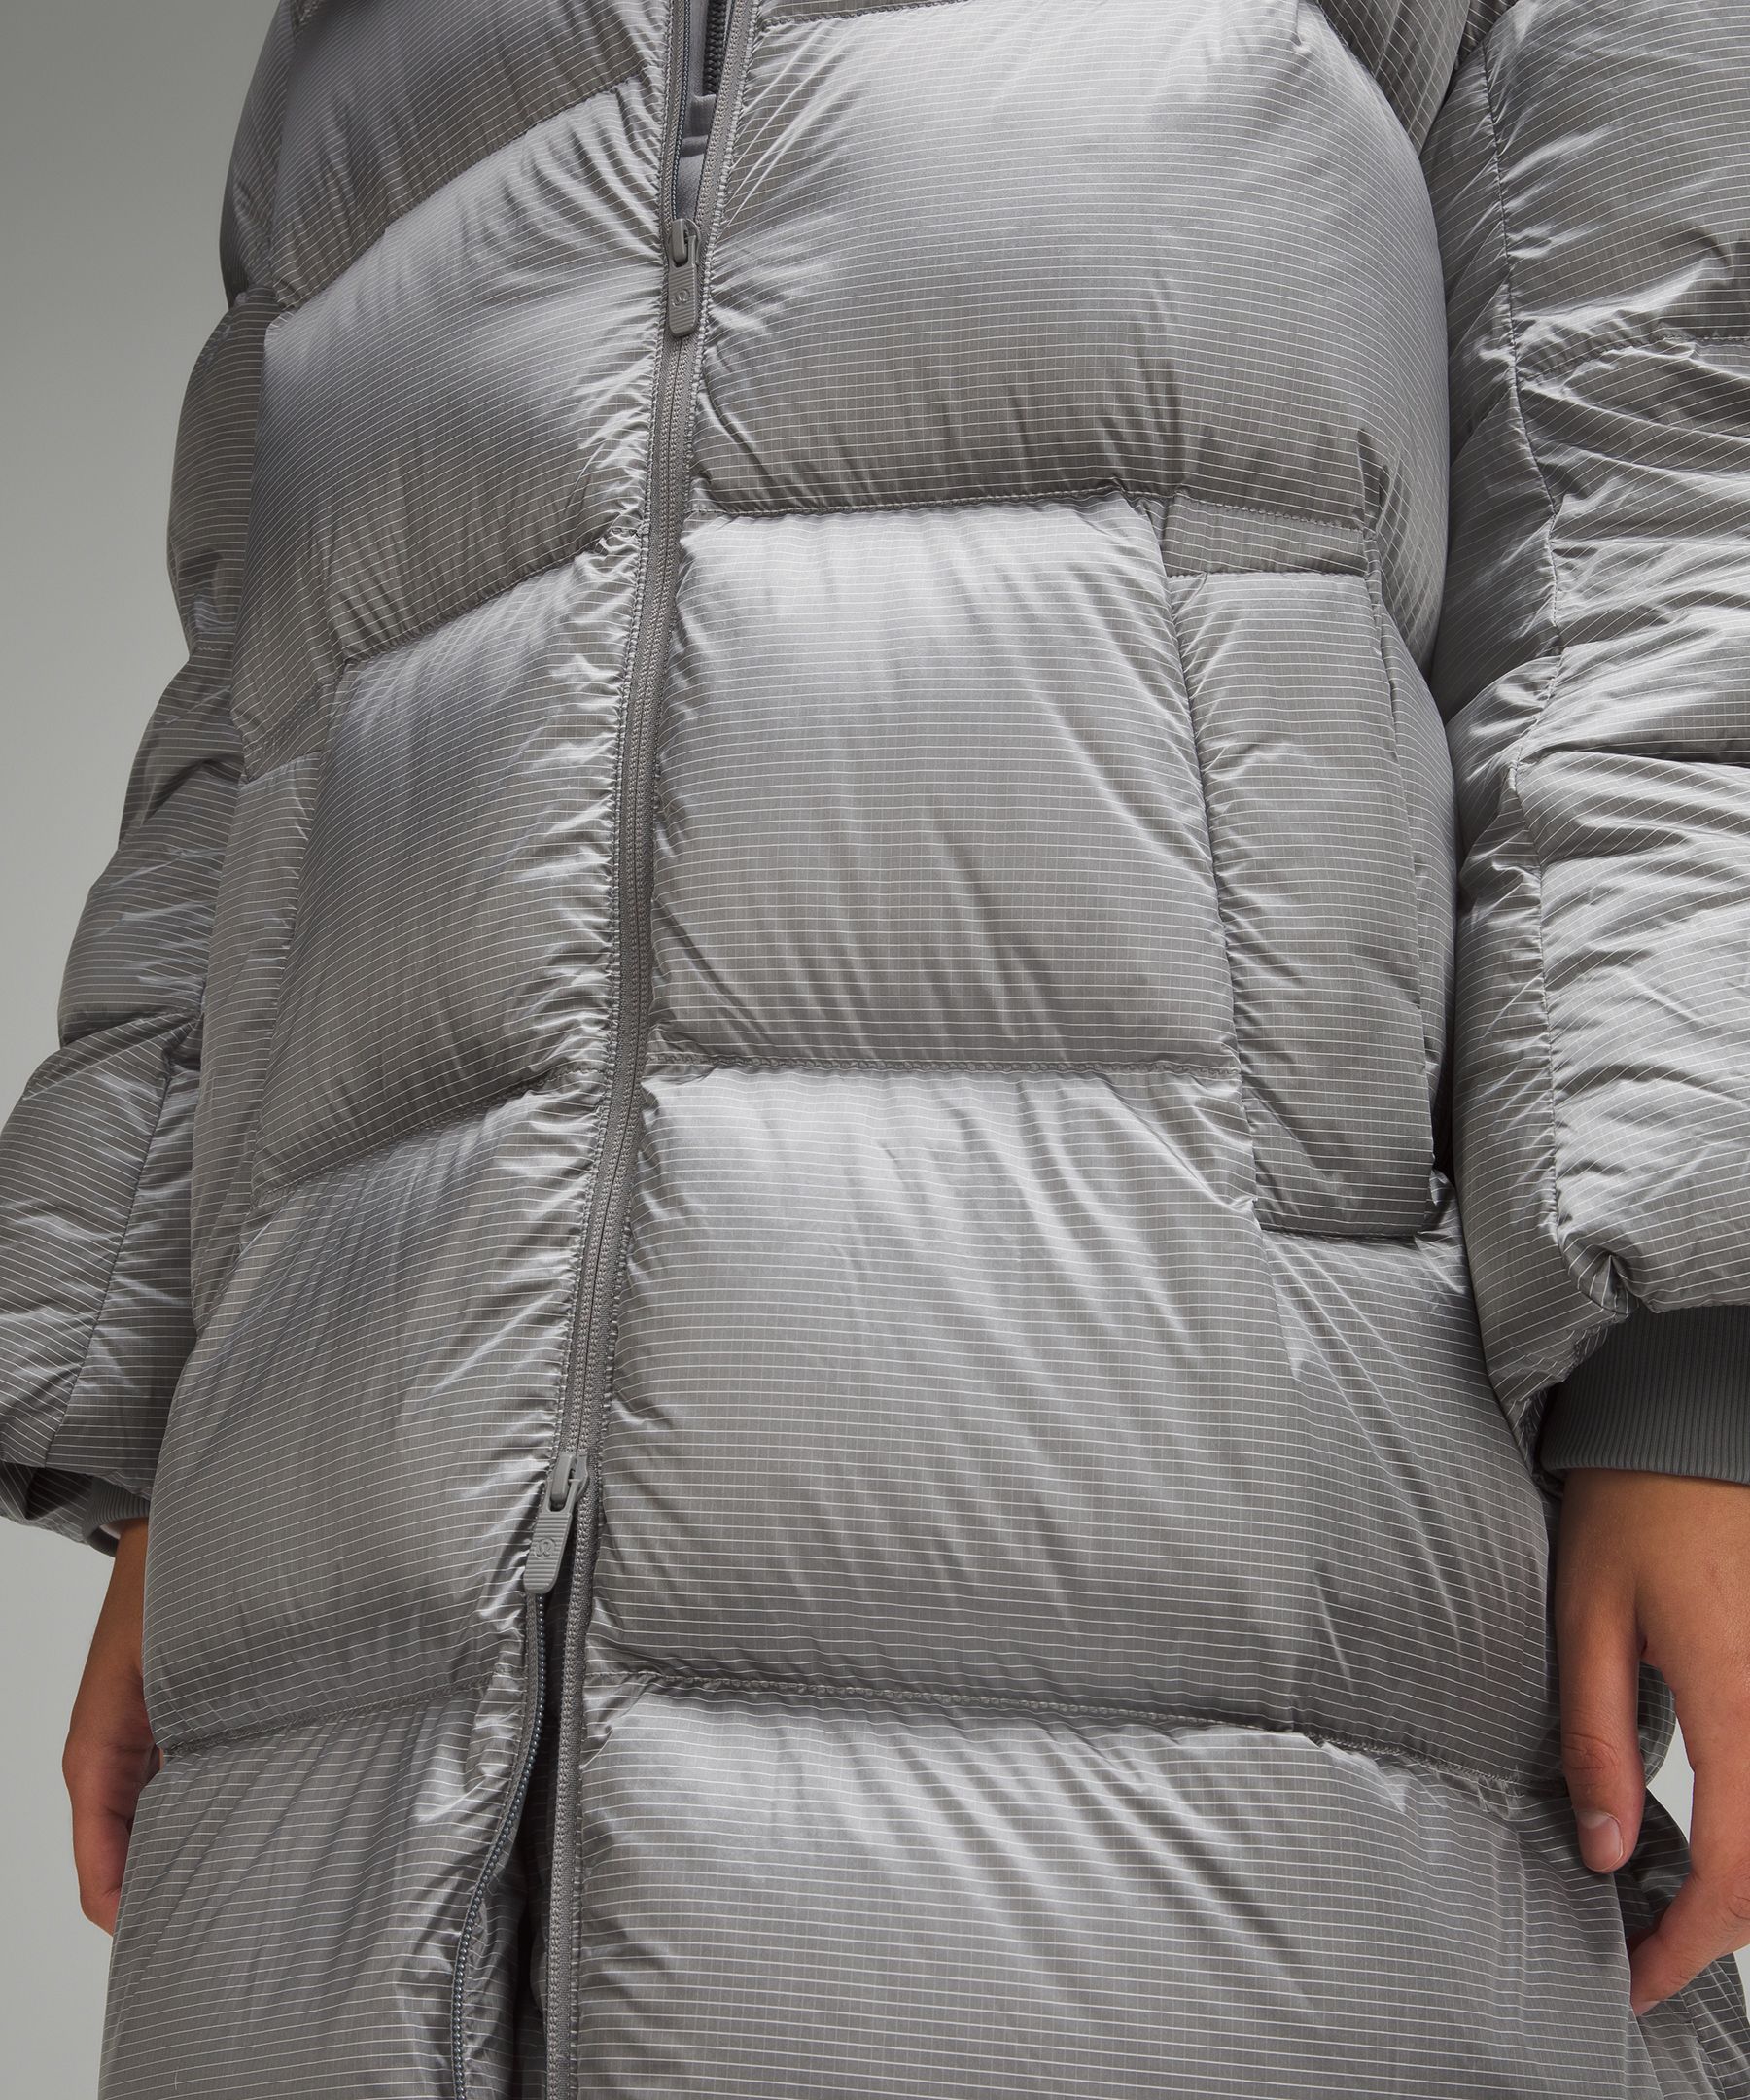 Lululemon jacket womens 4 Black down puffer belted quilted pockets